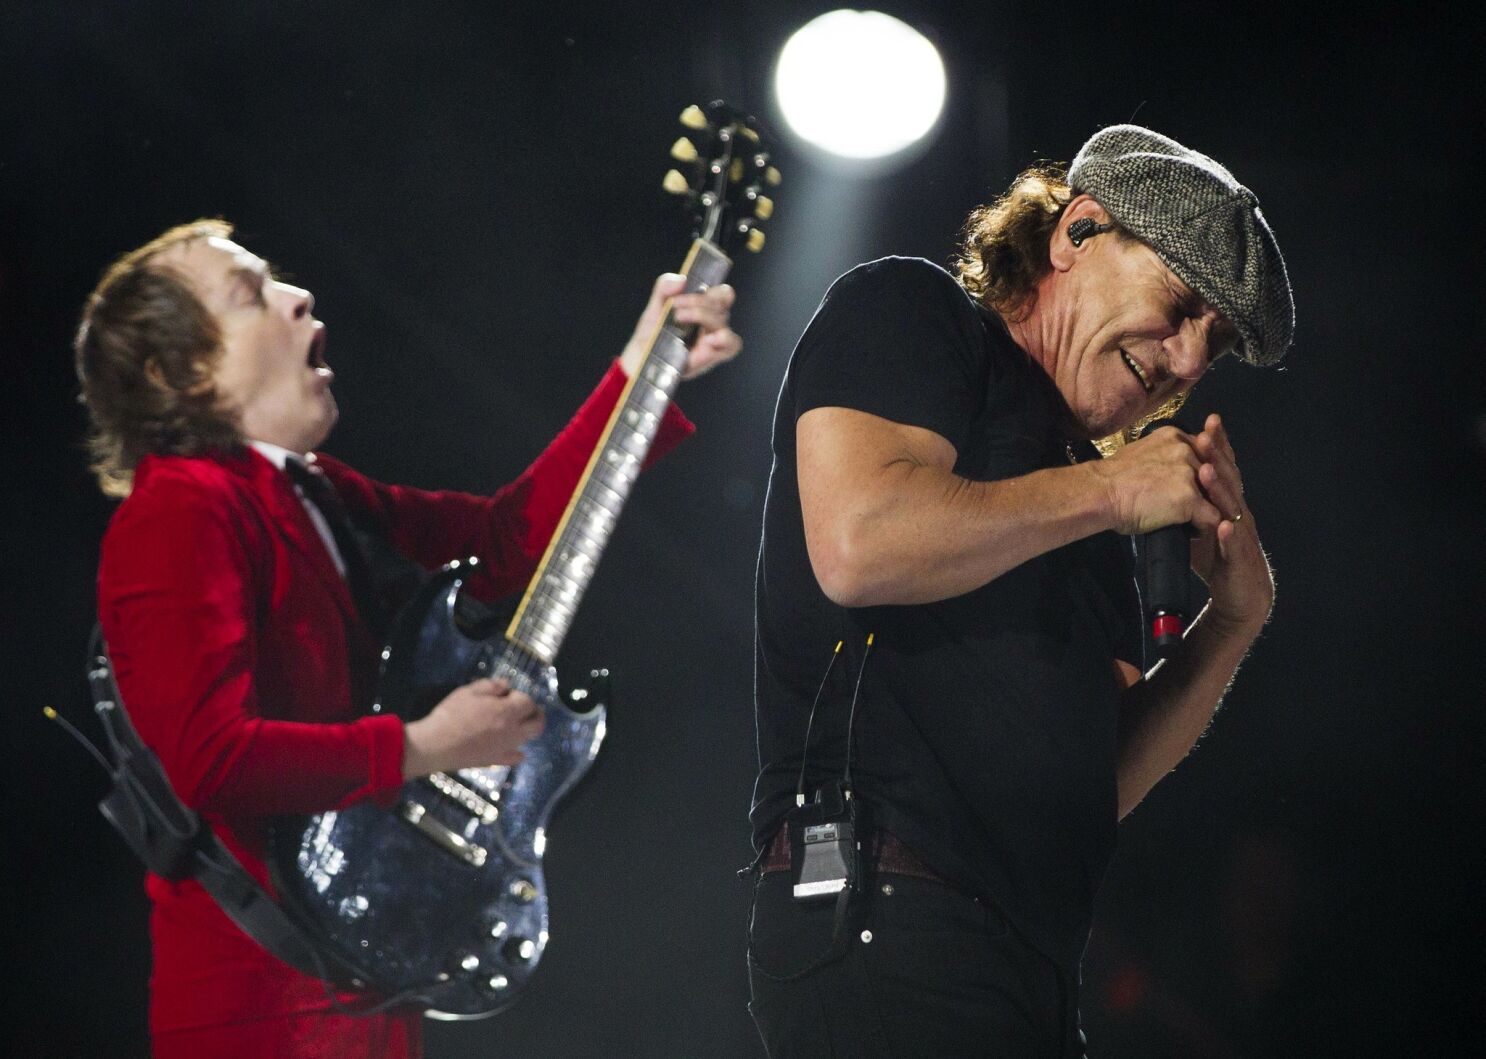 AC/DC rocked hard at Coachella in band's first full concert six years. - The San Diego